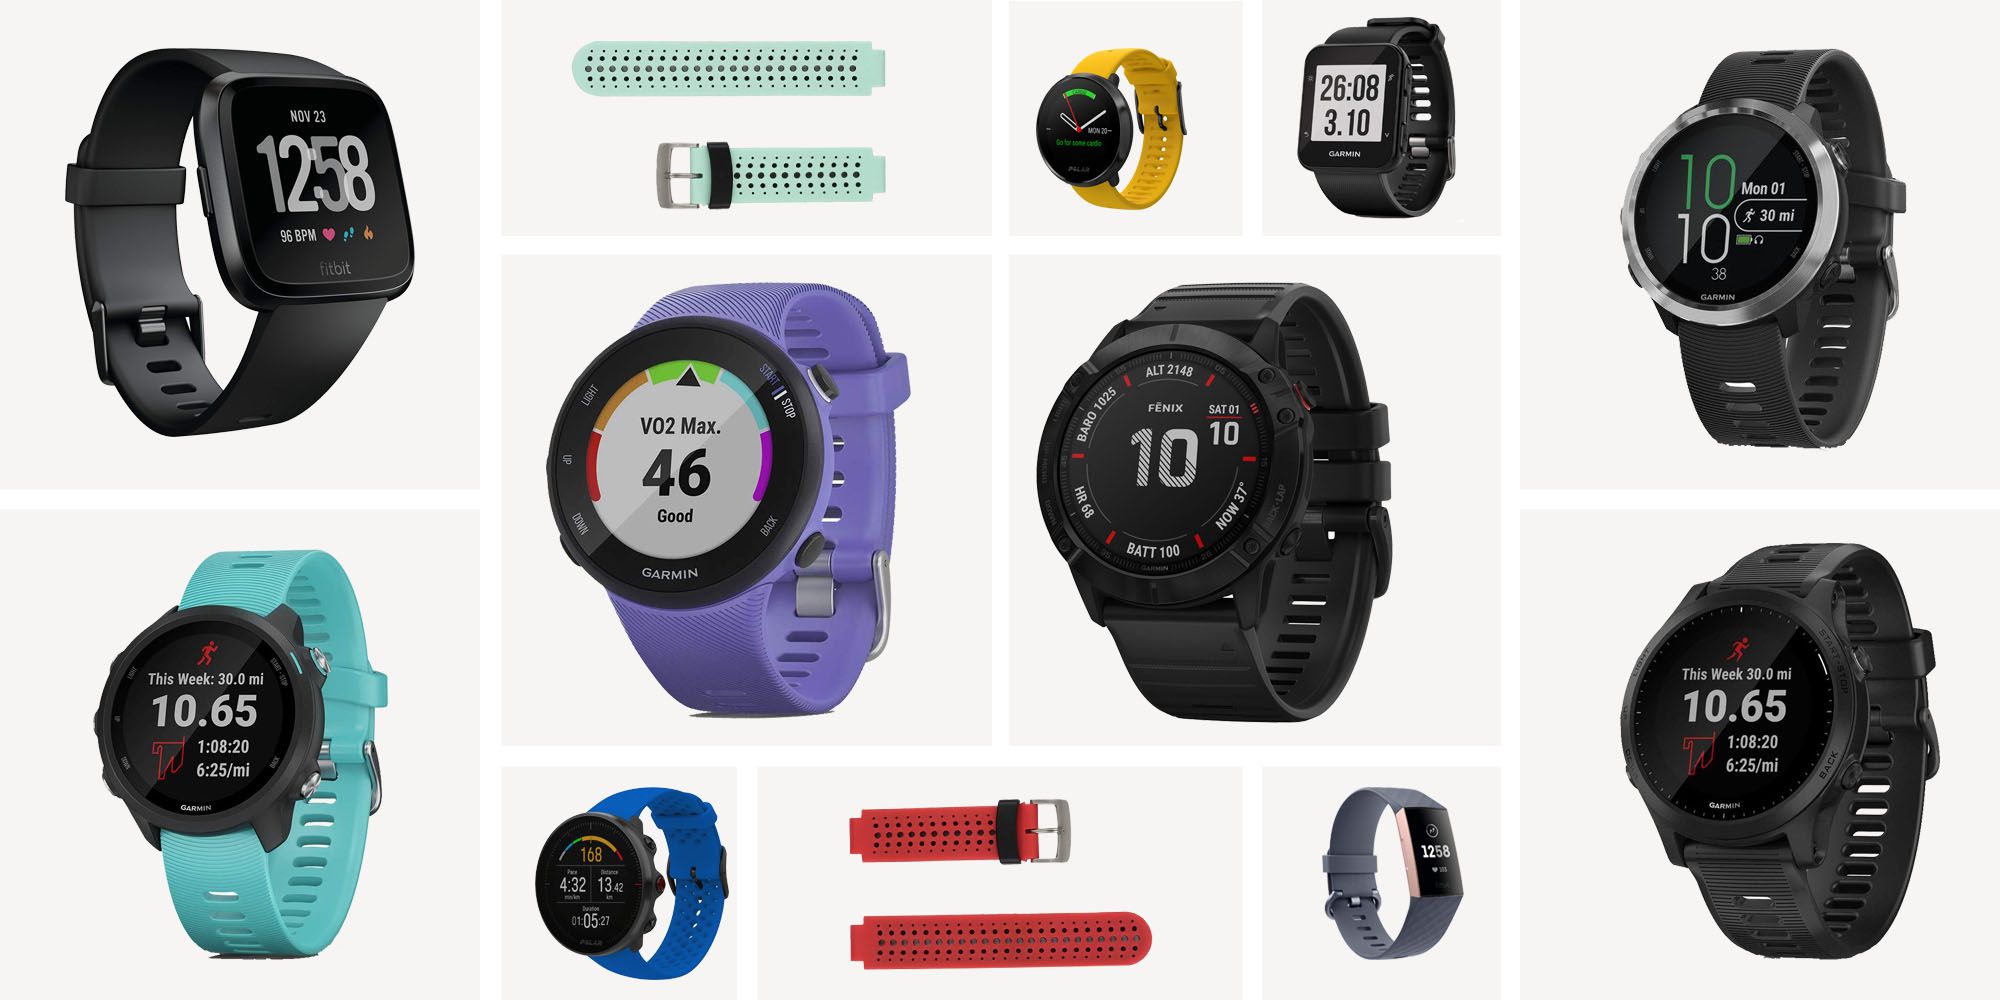 How to get a running watch in the Cyber Monday sales